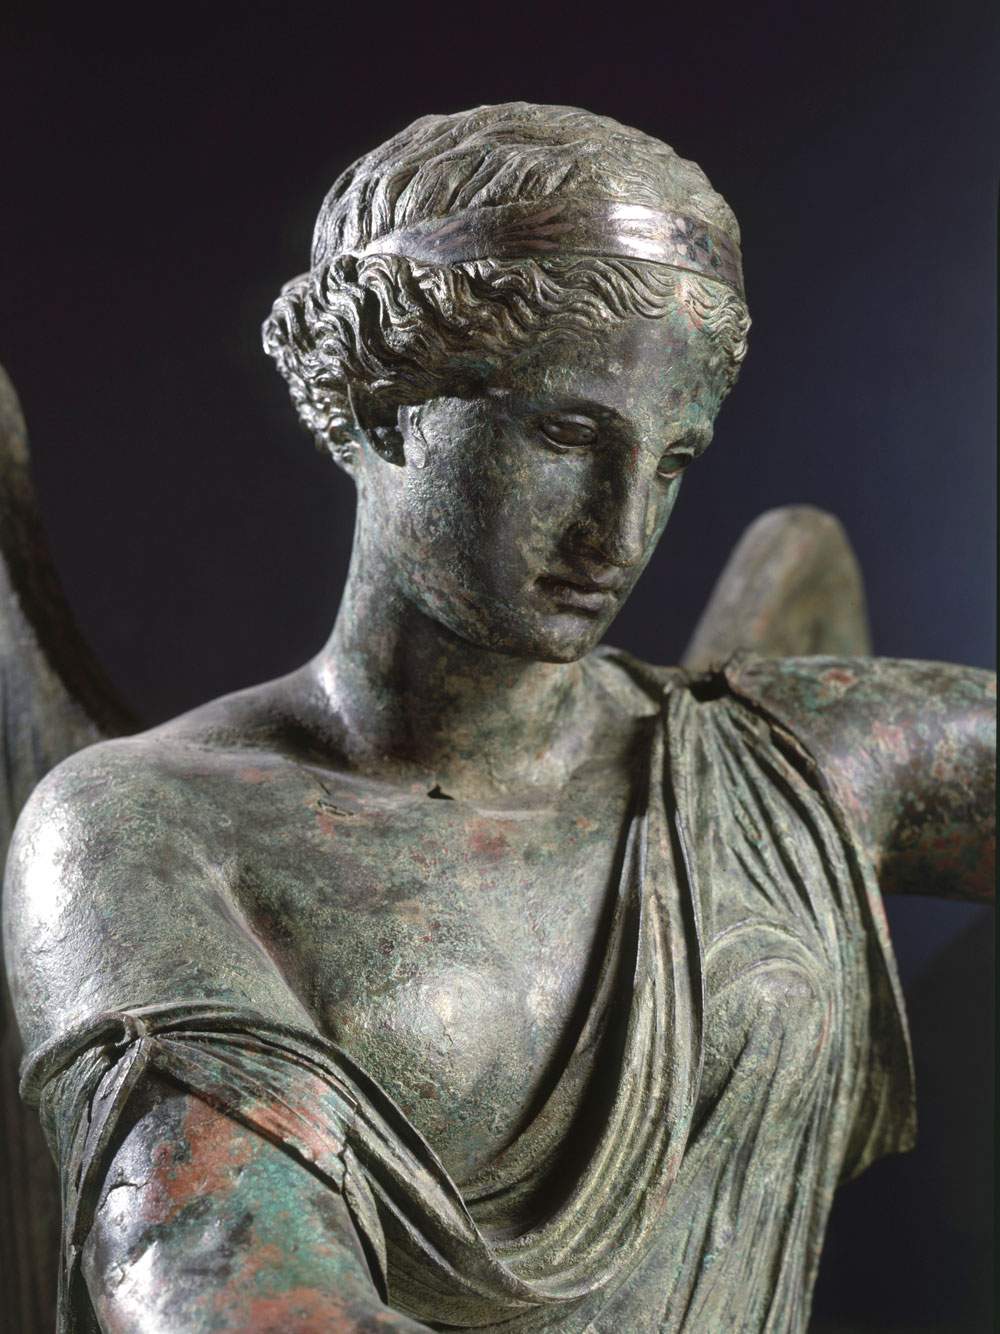 Brescia, Winged Victory restored again. It will be placed in the renovated Capitolium